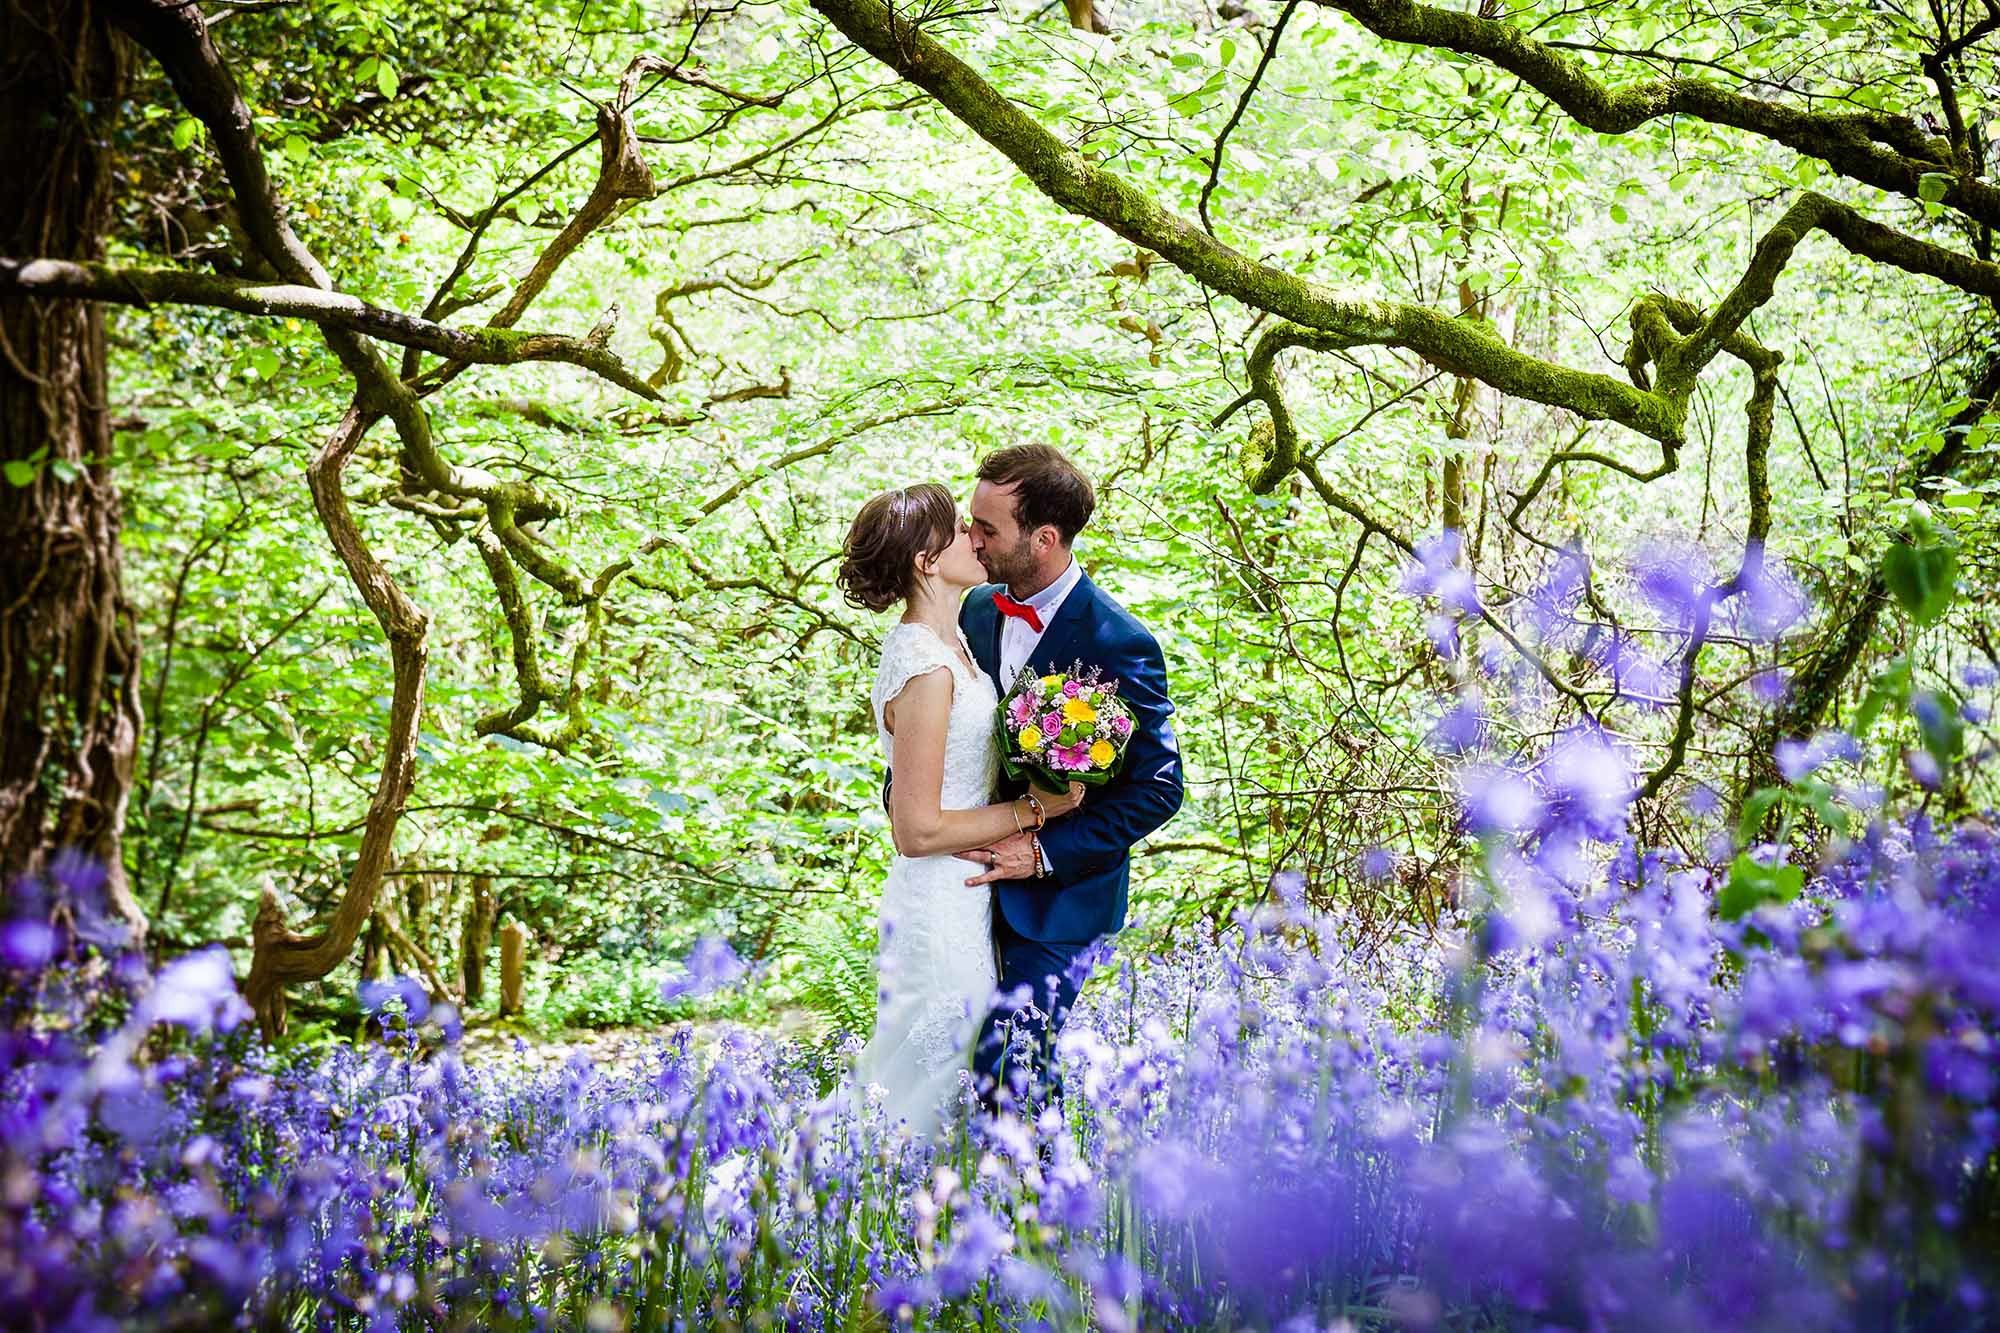 Newly weds kissing in a bluebell wood. The couple are in the centre of the image. They are surrounded by trees in leaf and there are lots of bluebells in the foreground. The image is taken in springtime. The couple are kissing the bride is on the left of the photo and the groom is on the right. The bride is wearing a lacy sleeveless dress you cannot see the couple's feet. In her right hand the bride is holding a bouquet of bright pink and bright yellow flowers. She has dark hair and she wears it up. The groom is wearing a mid blue suit with a white shirt and red bowtie. The groom has dark hair and a beard. The bride also has dark hair.